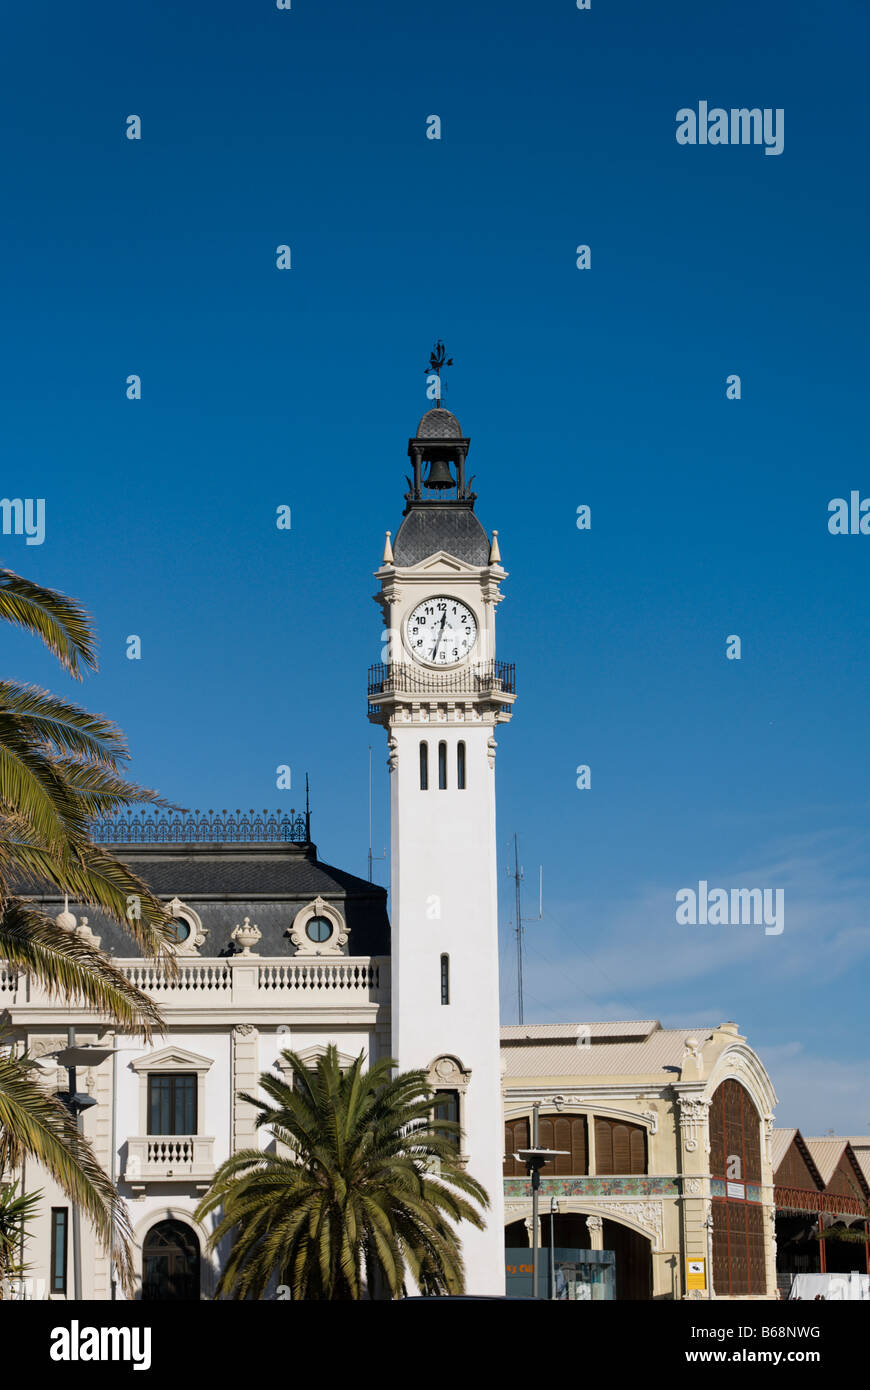 Old port clock tower building in Valencia Spain Stock Photo